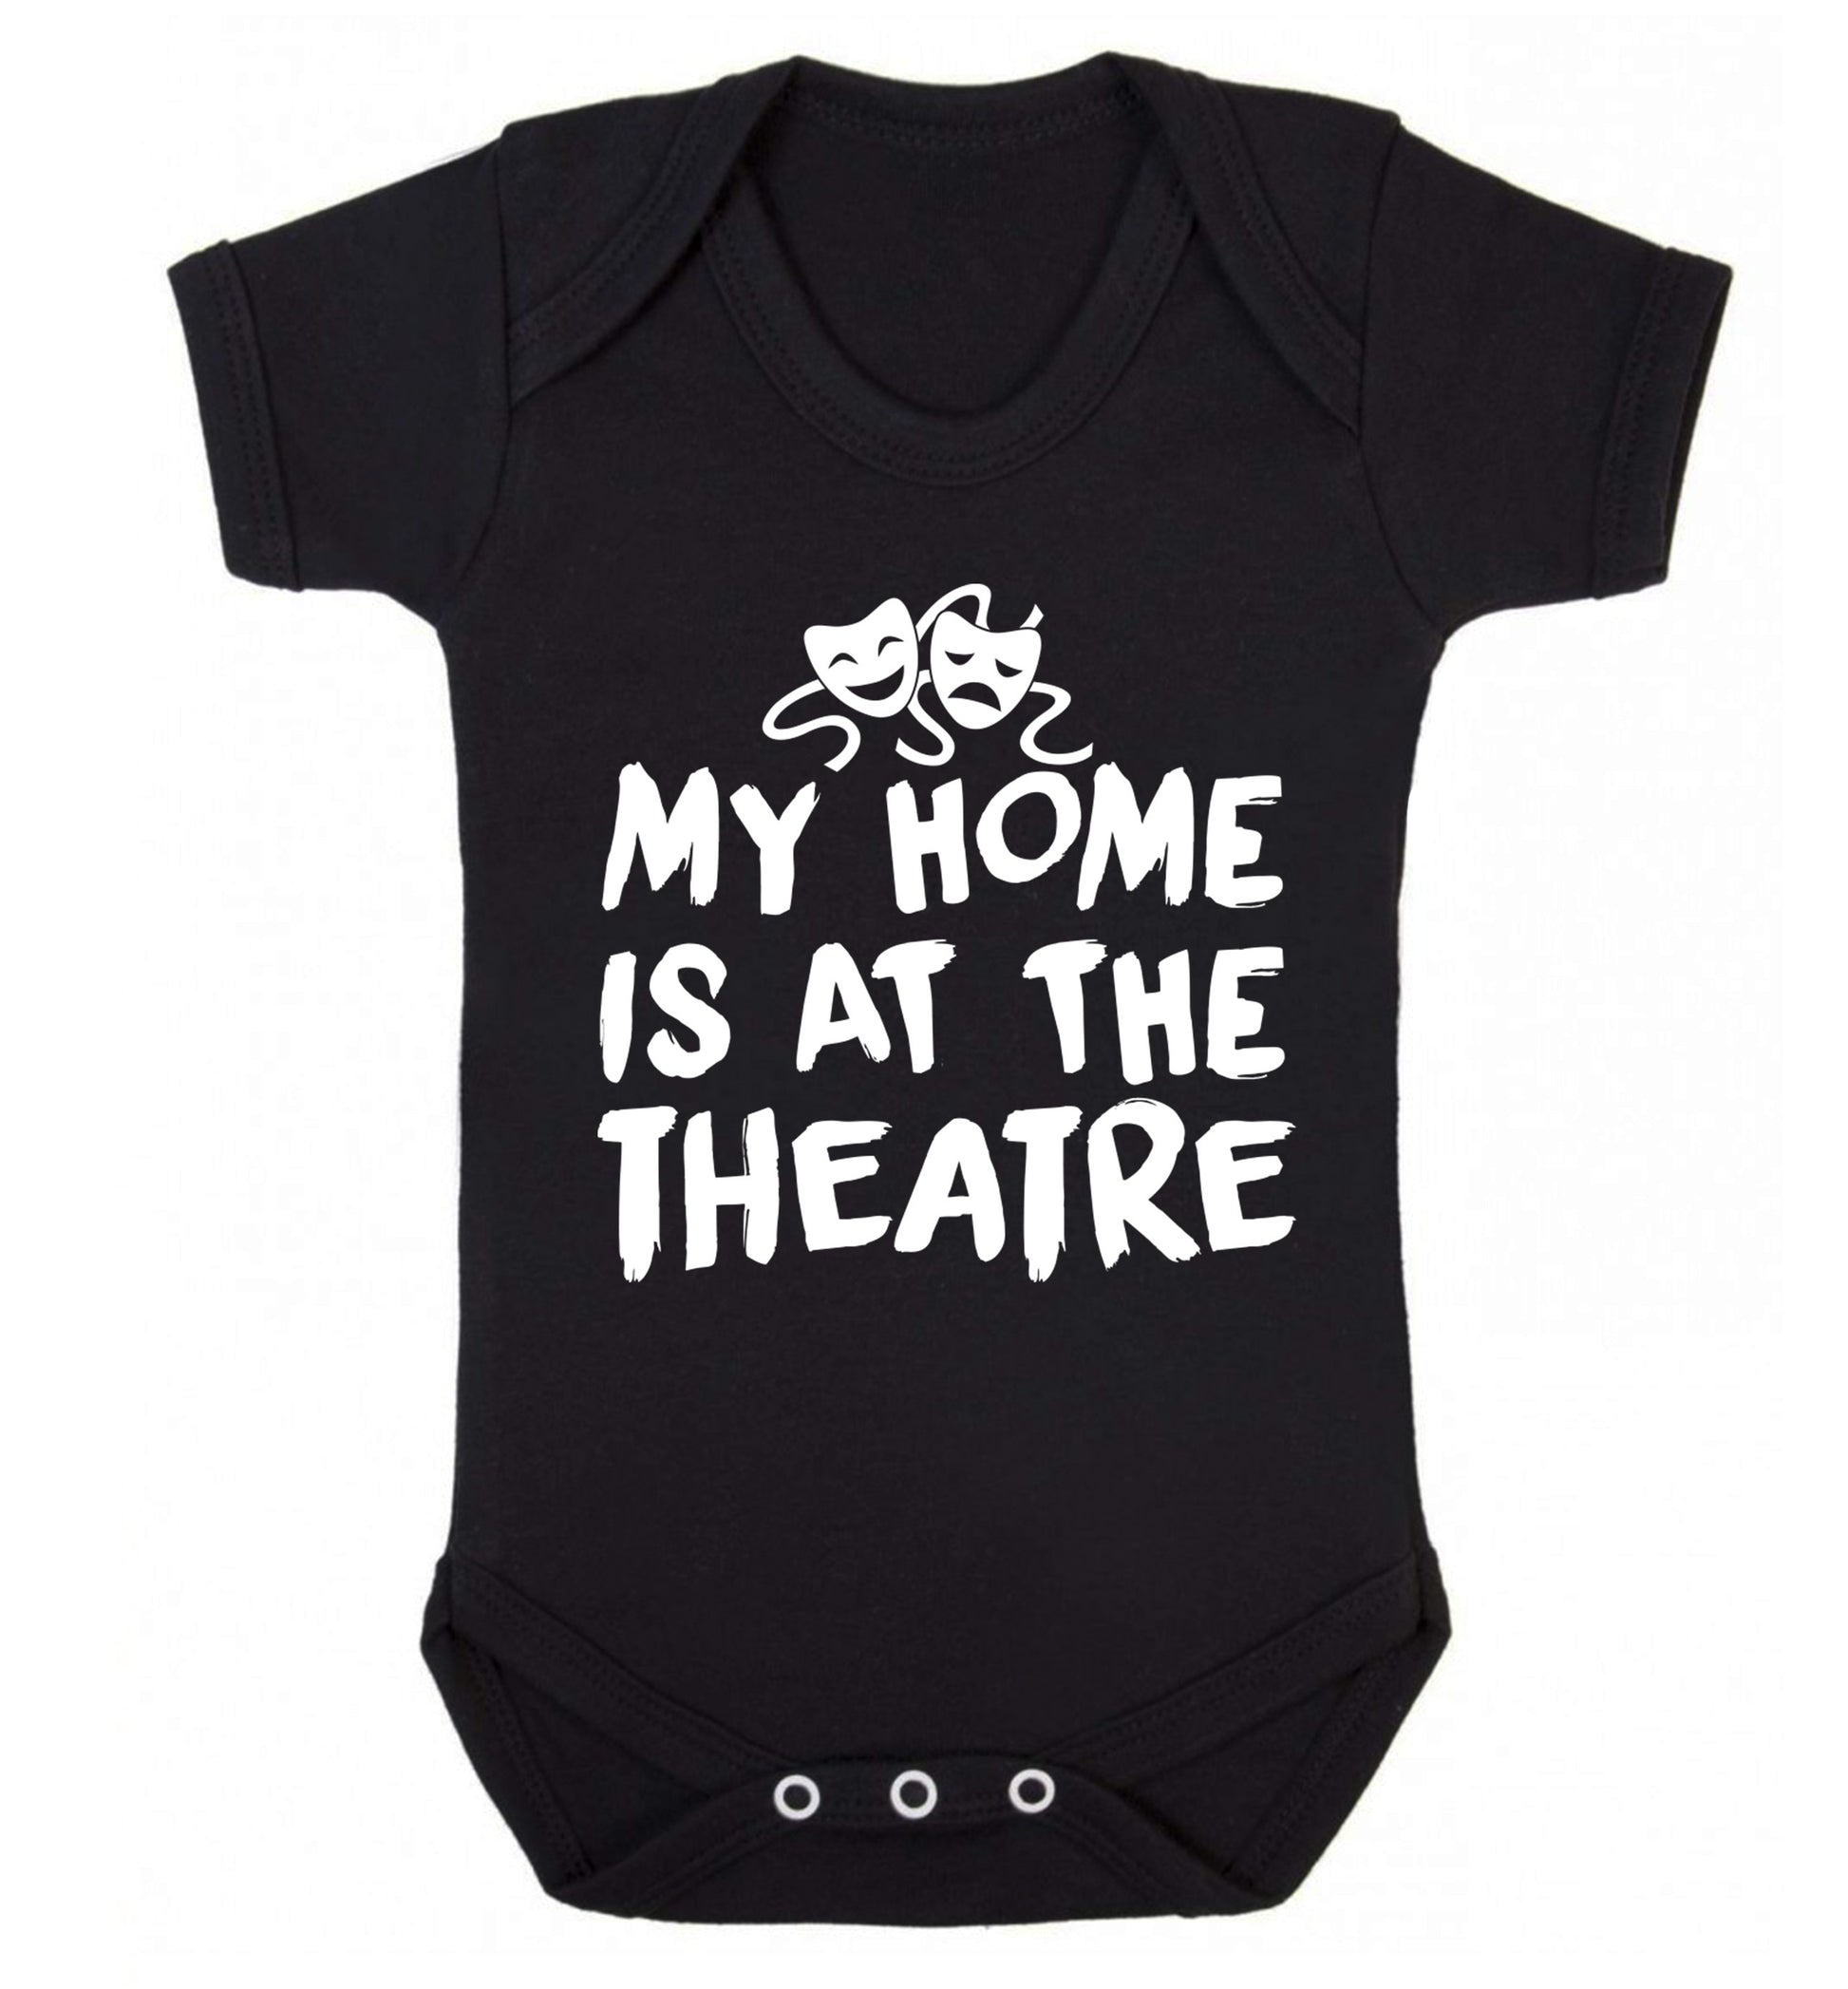 My home is at the theatre Baby Vest black 18-24 months